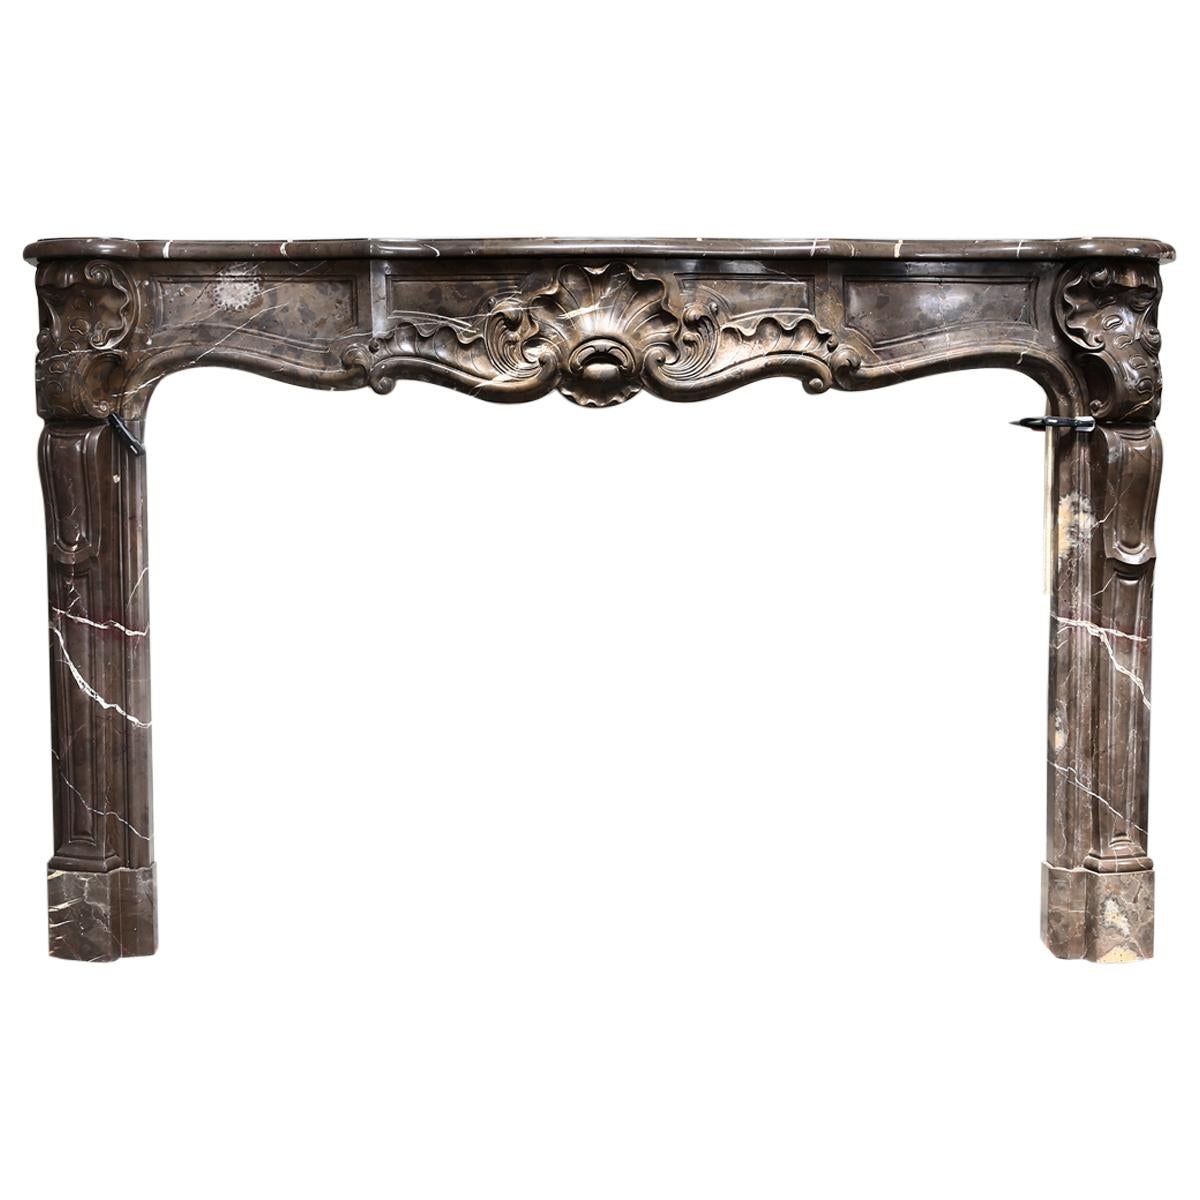 Exclusive Mantel of Marbre de Boulogne in Style of Louis XV For Sale